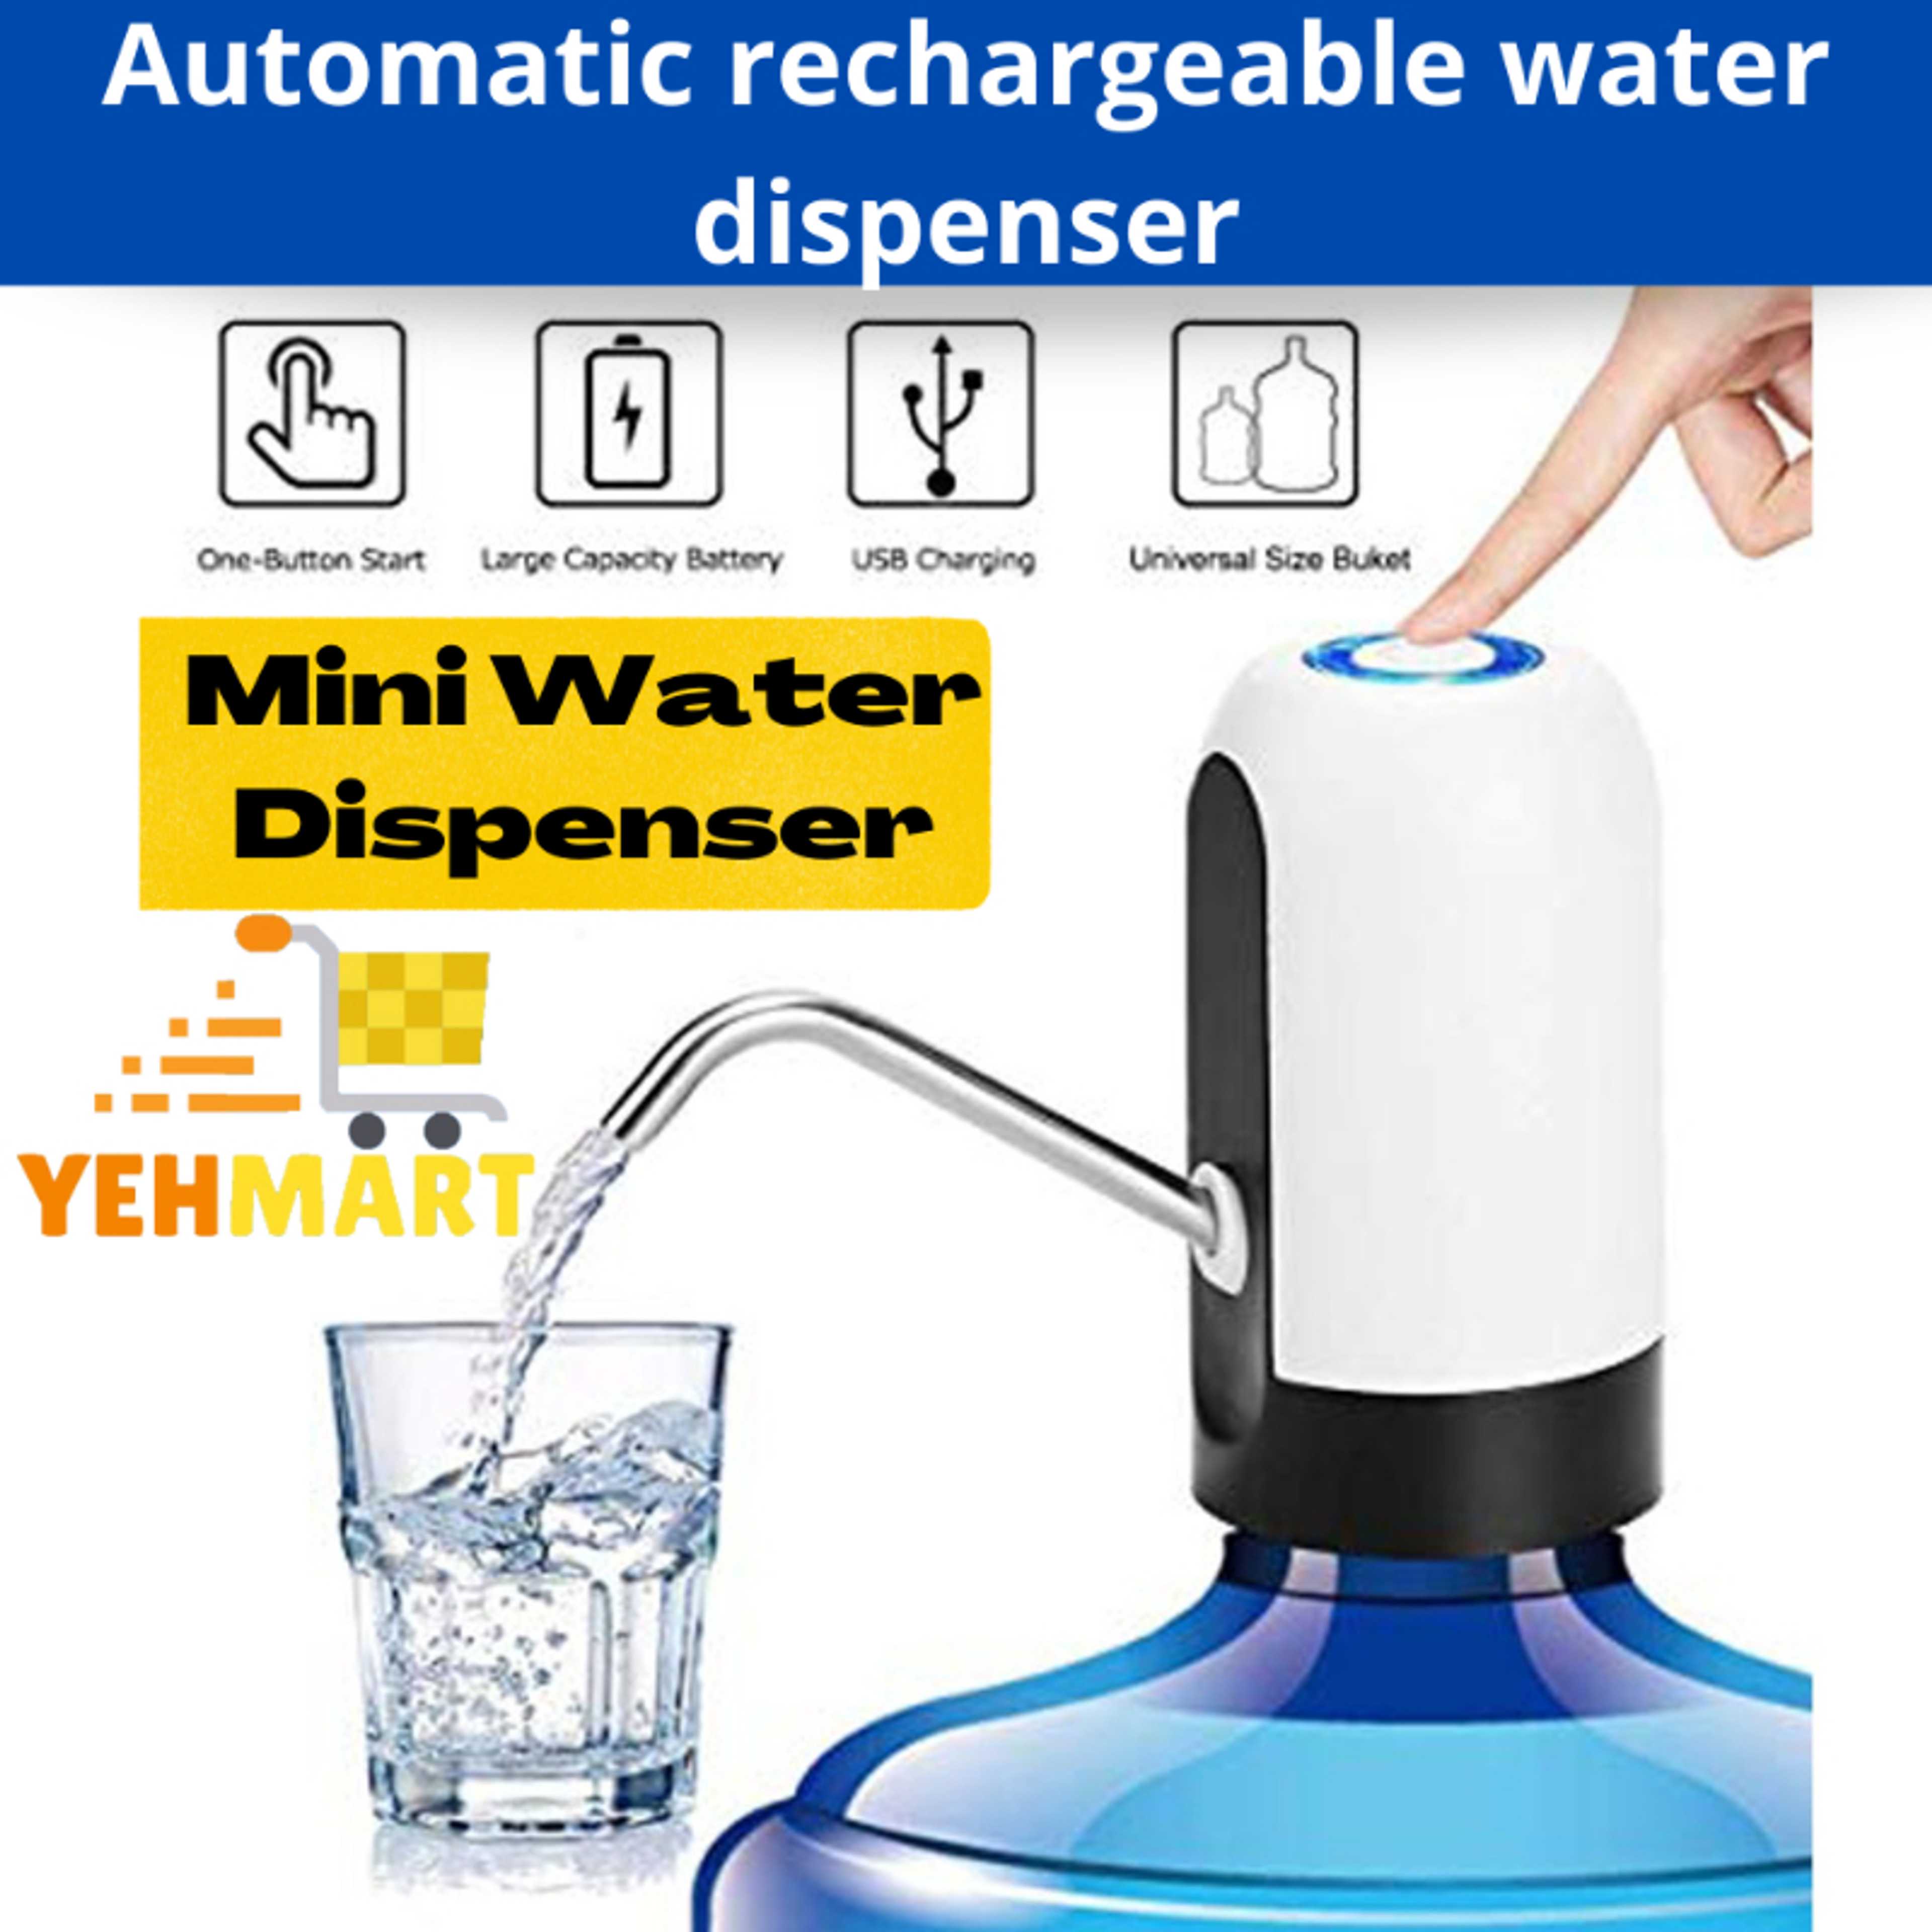 New Rechargeable Automatic Water Dispenser,Water Bottle Pump USB Charging Drinking Portable Electric dispenser pump for house and office etc.